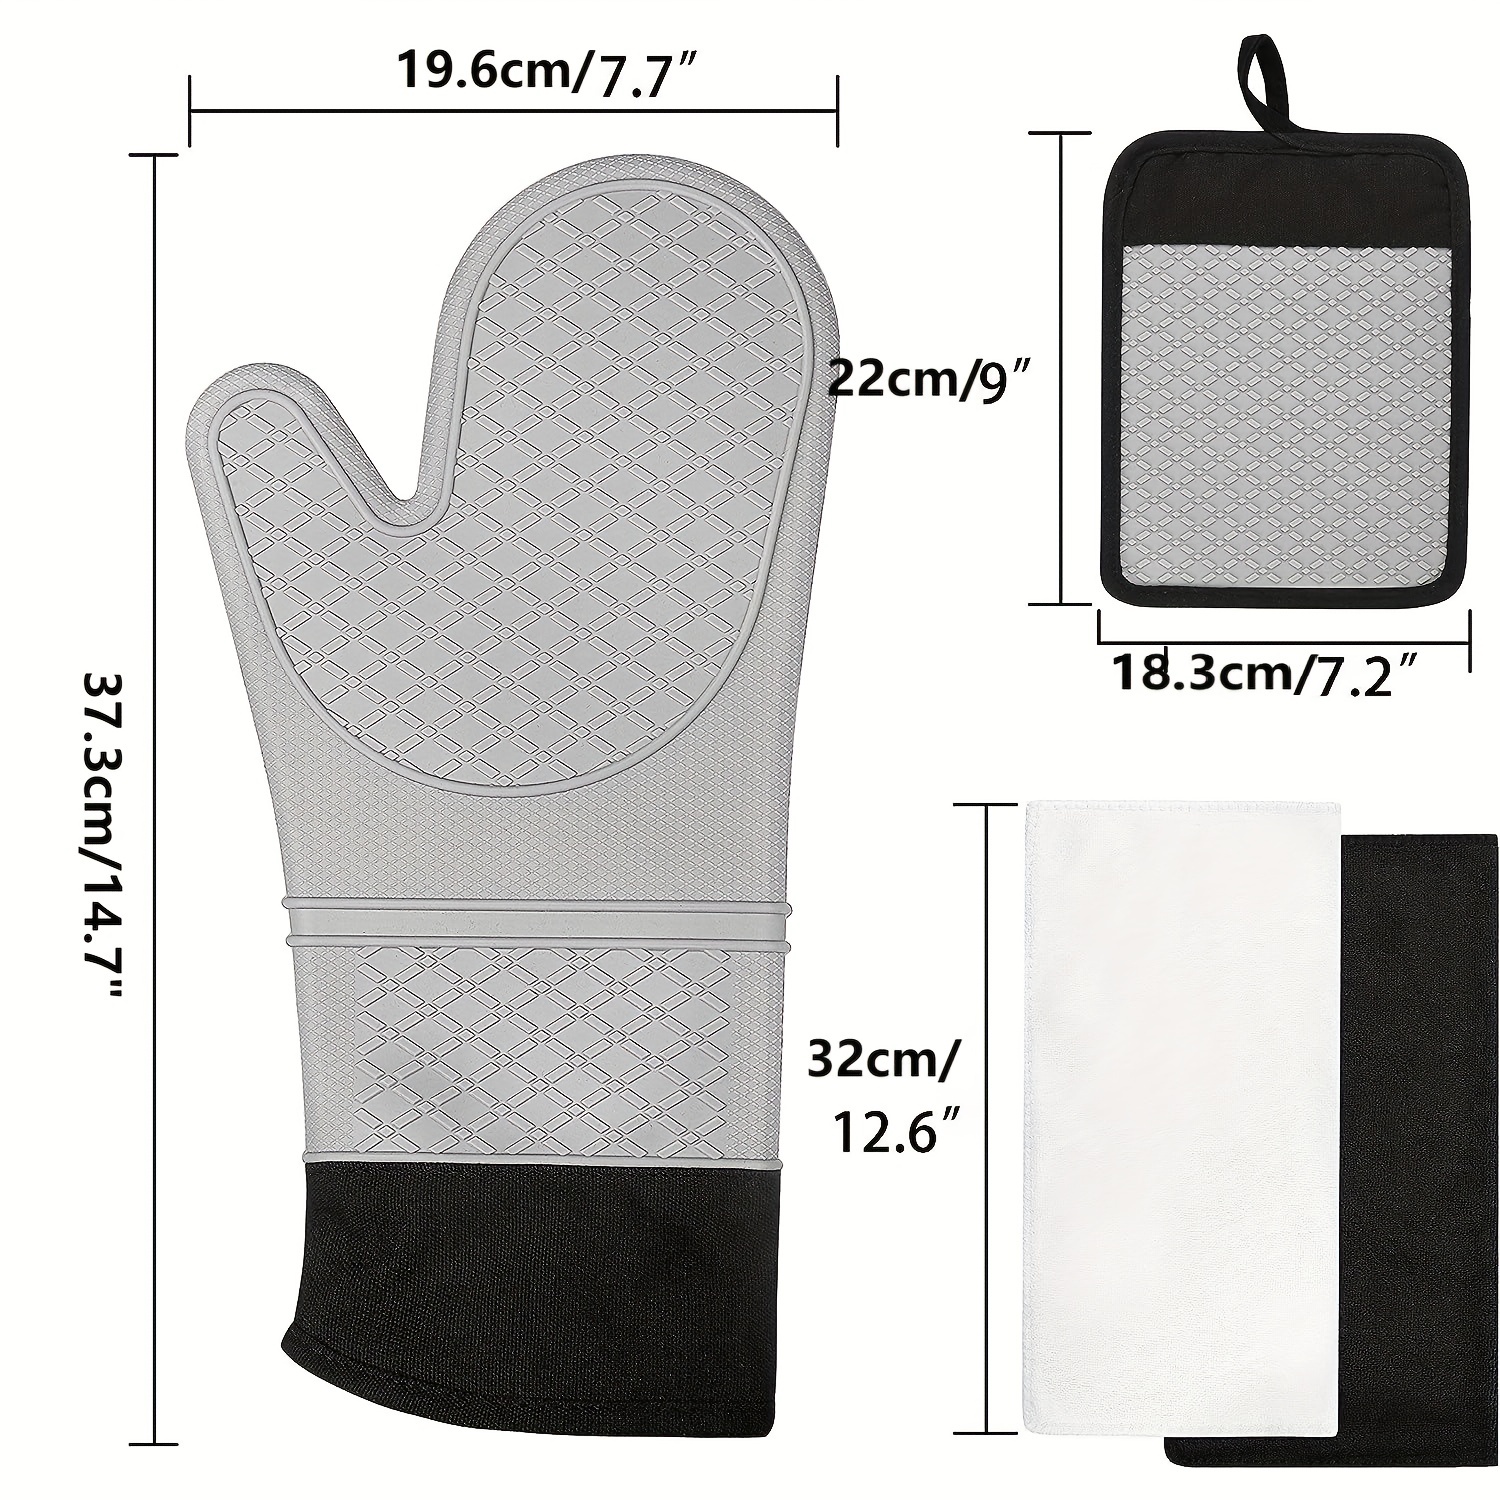 Oven Mitts and Pot Holders, 500℉ Heat Resistant Oven Mitt ,Oven Gloves with  Kitchen Towels Soft Cotton Lining, Non-Slip Surface Cooking Gloves